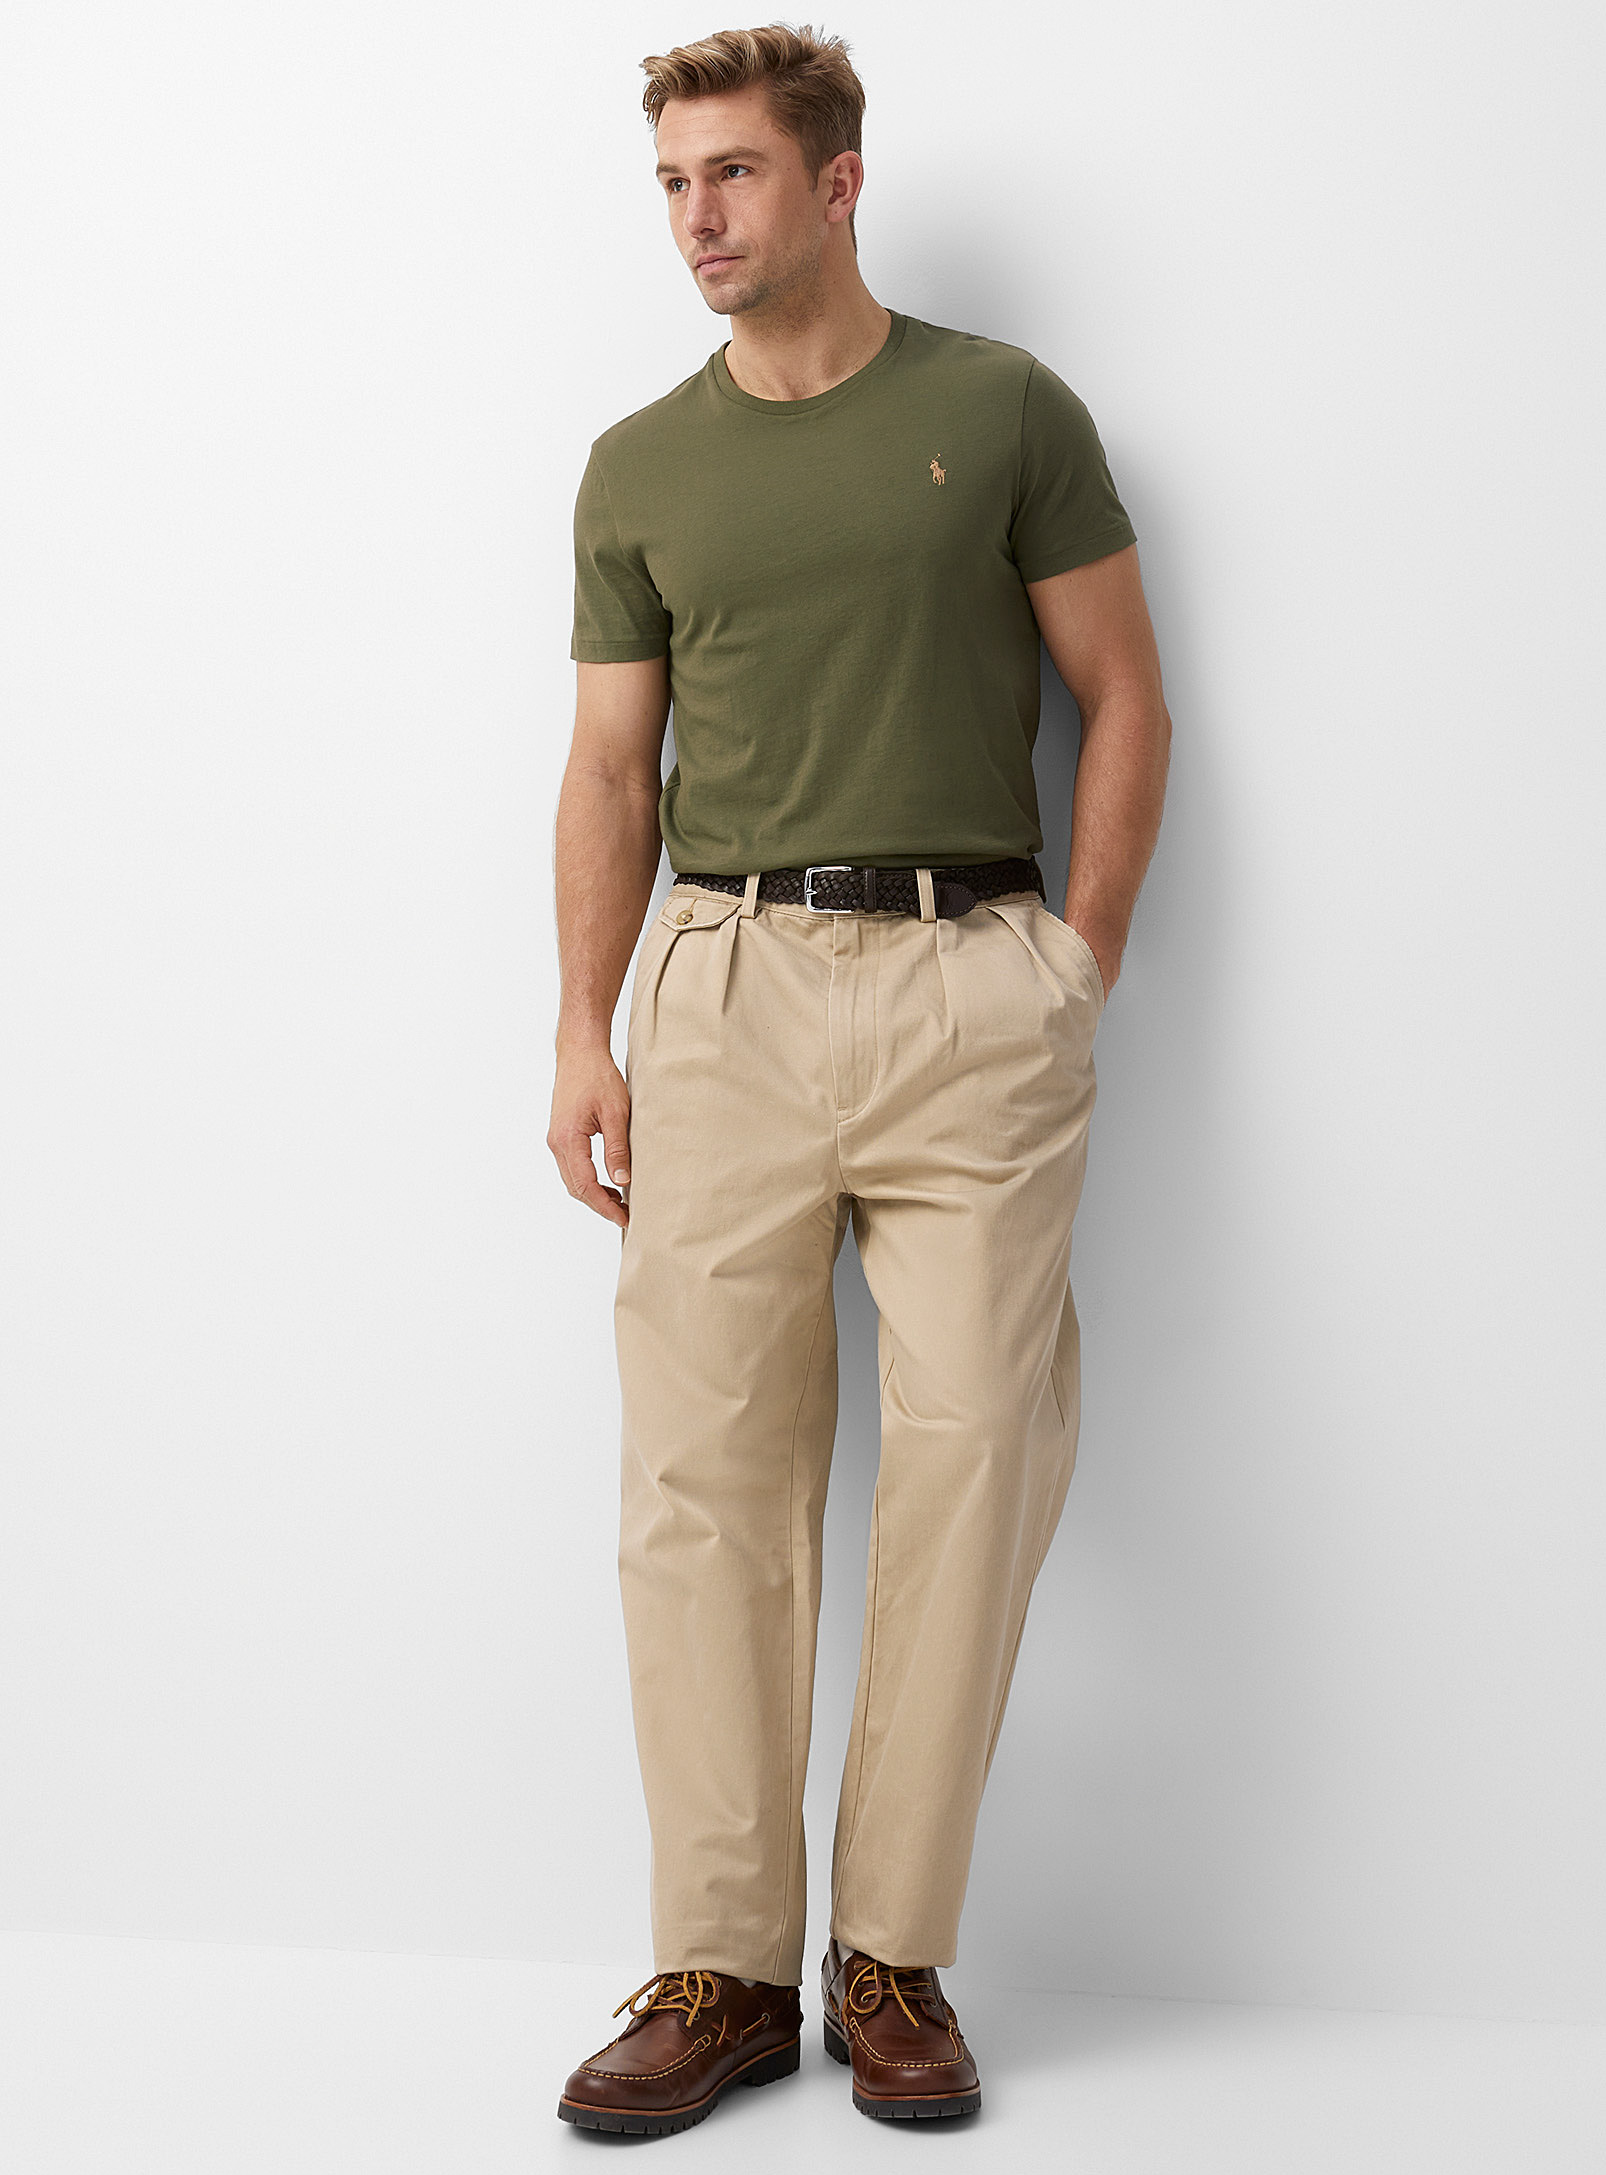 Polo Ralph Lauren - Men's The Whitman pleated chinos Loose fit